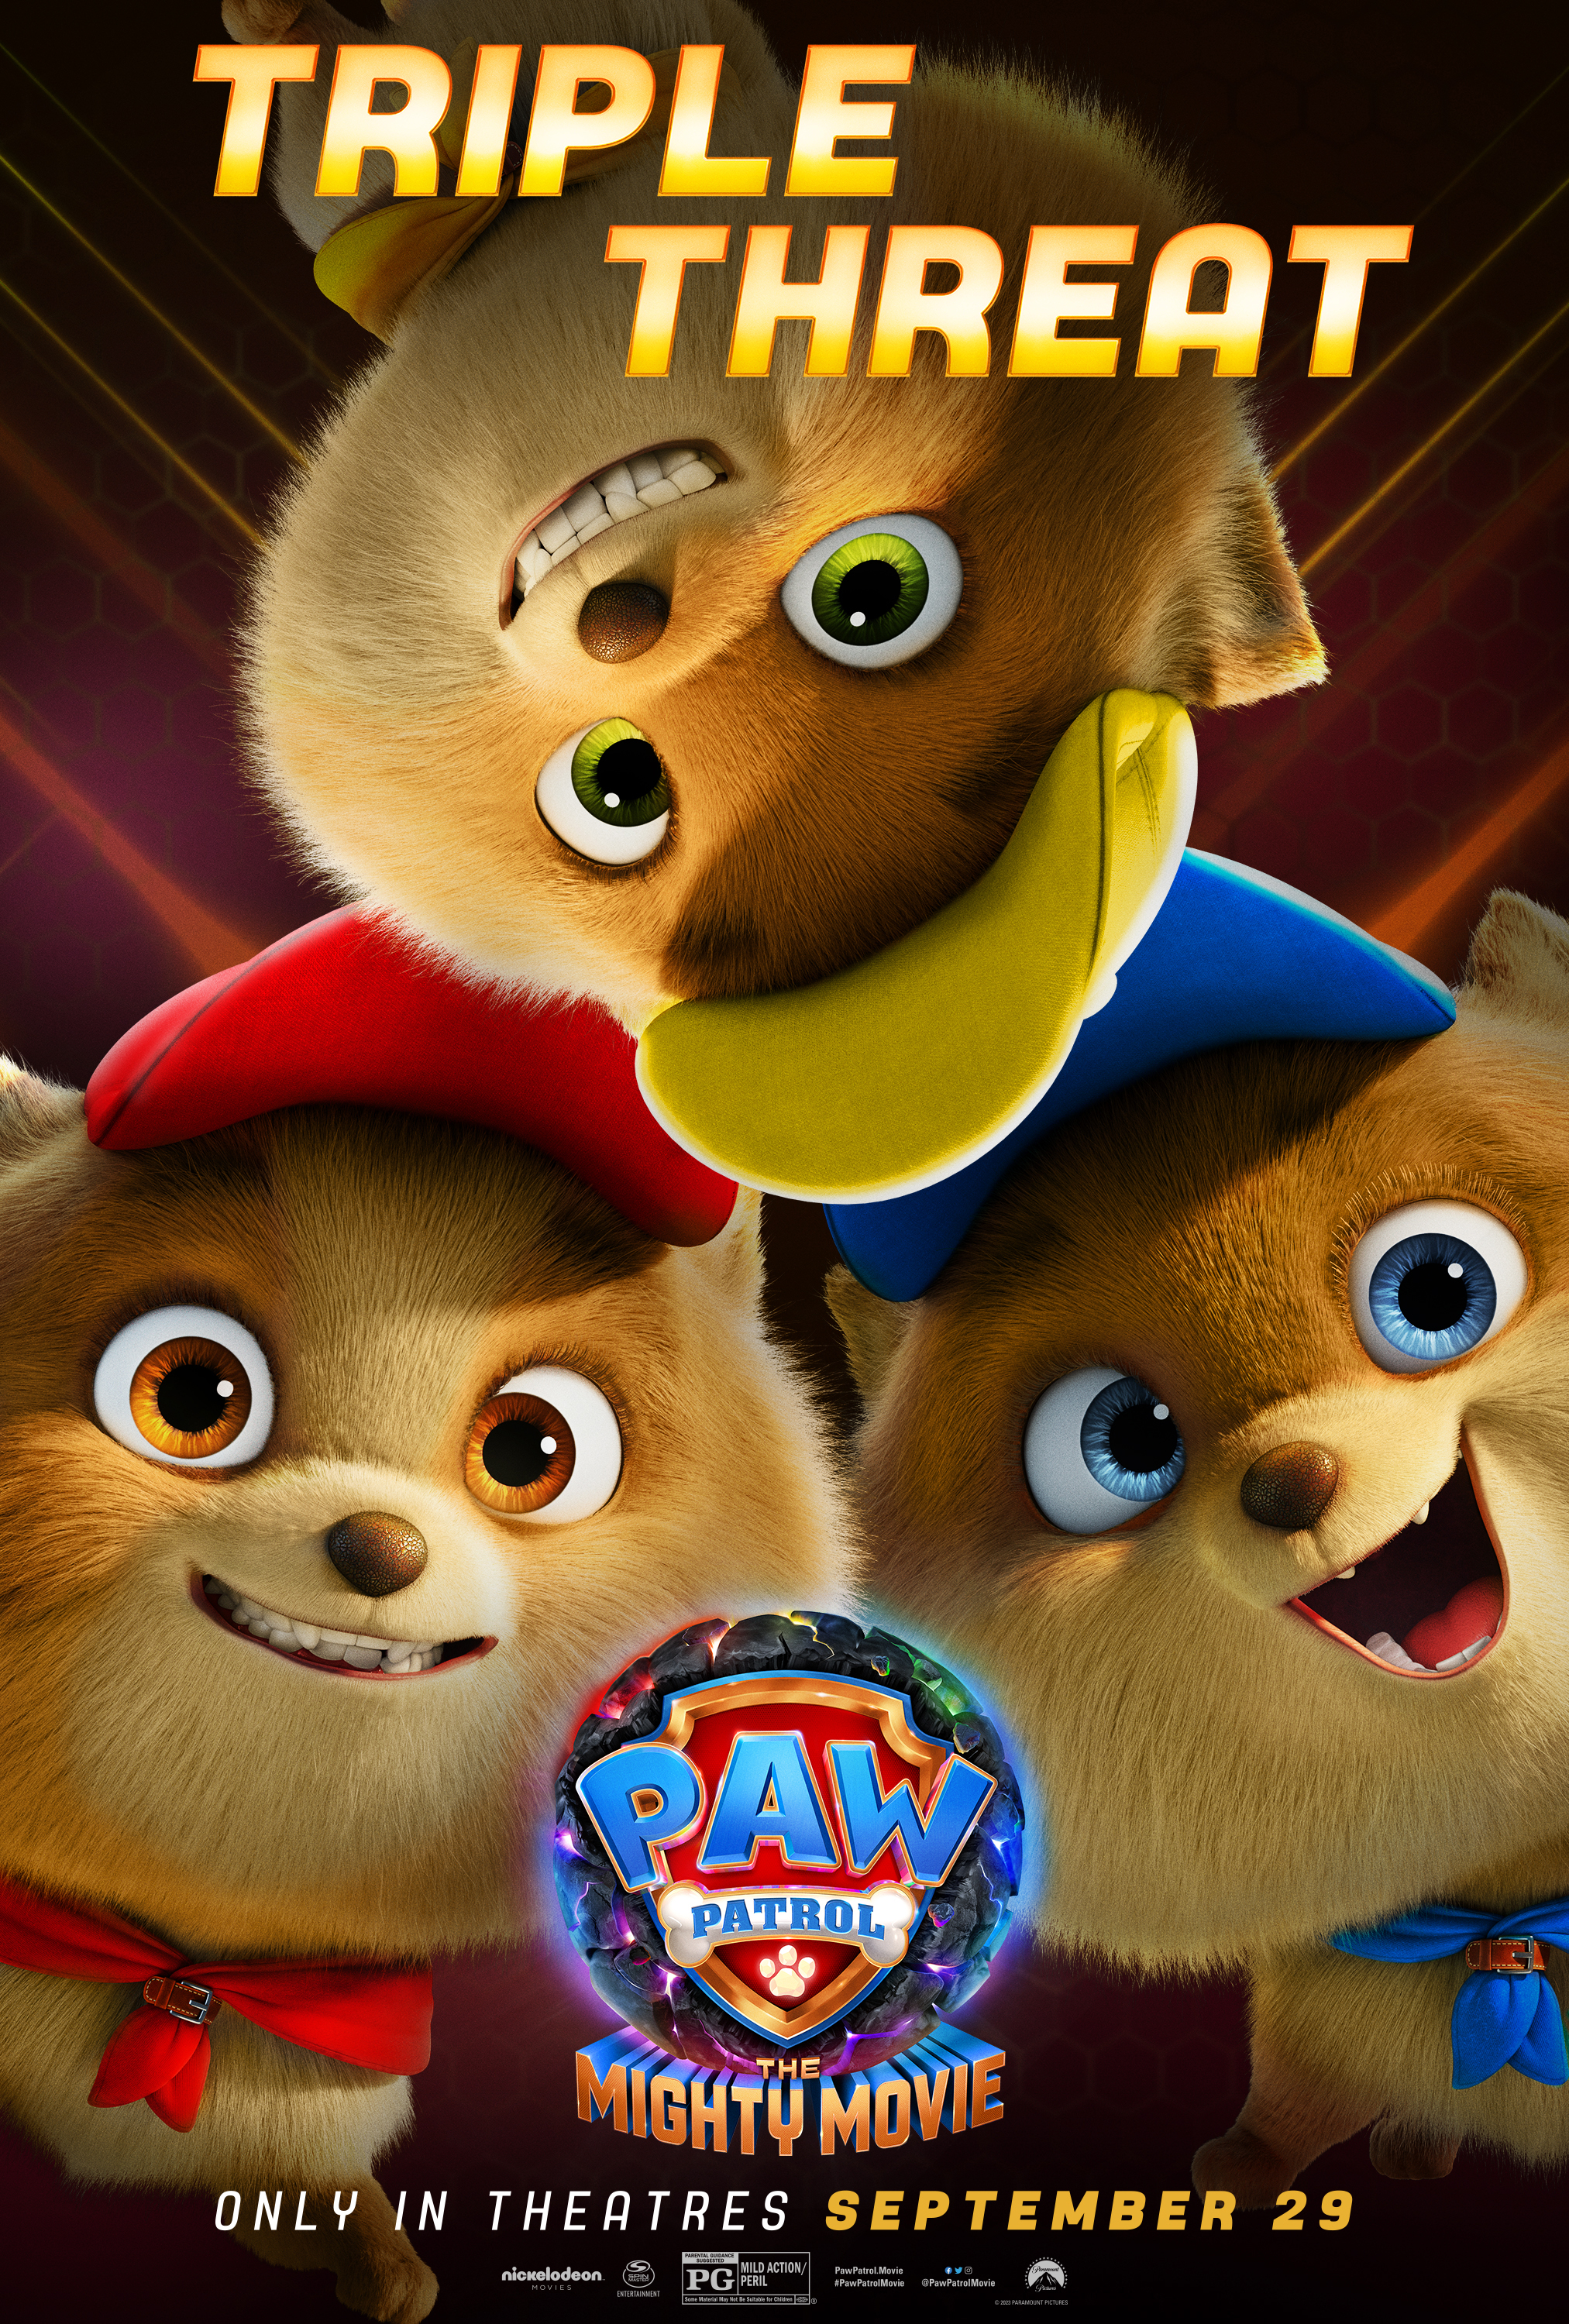 Paw Patrol: The Mighty Movie' Offers Bubble-Gum Heroics for Toddlers